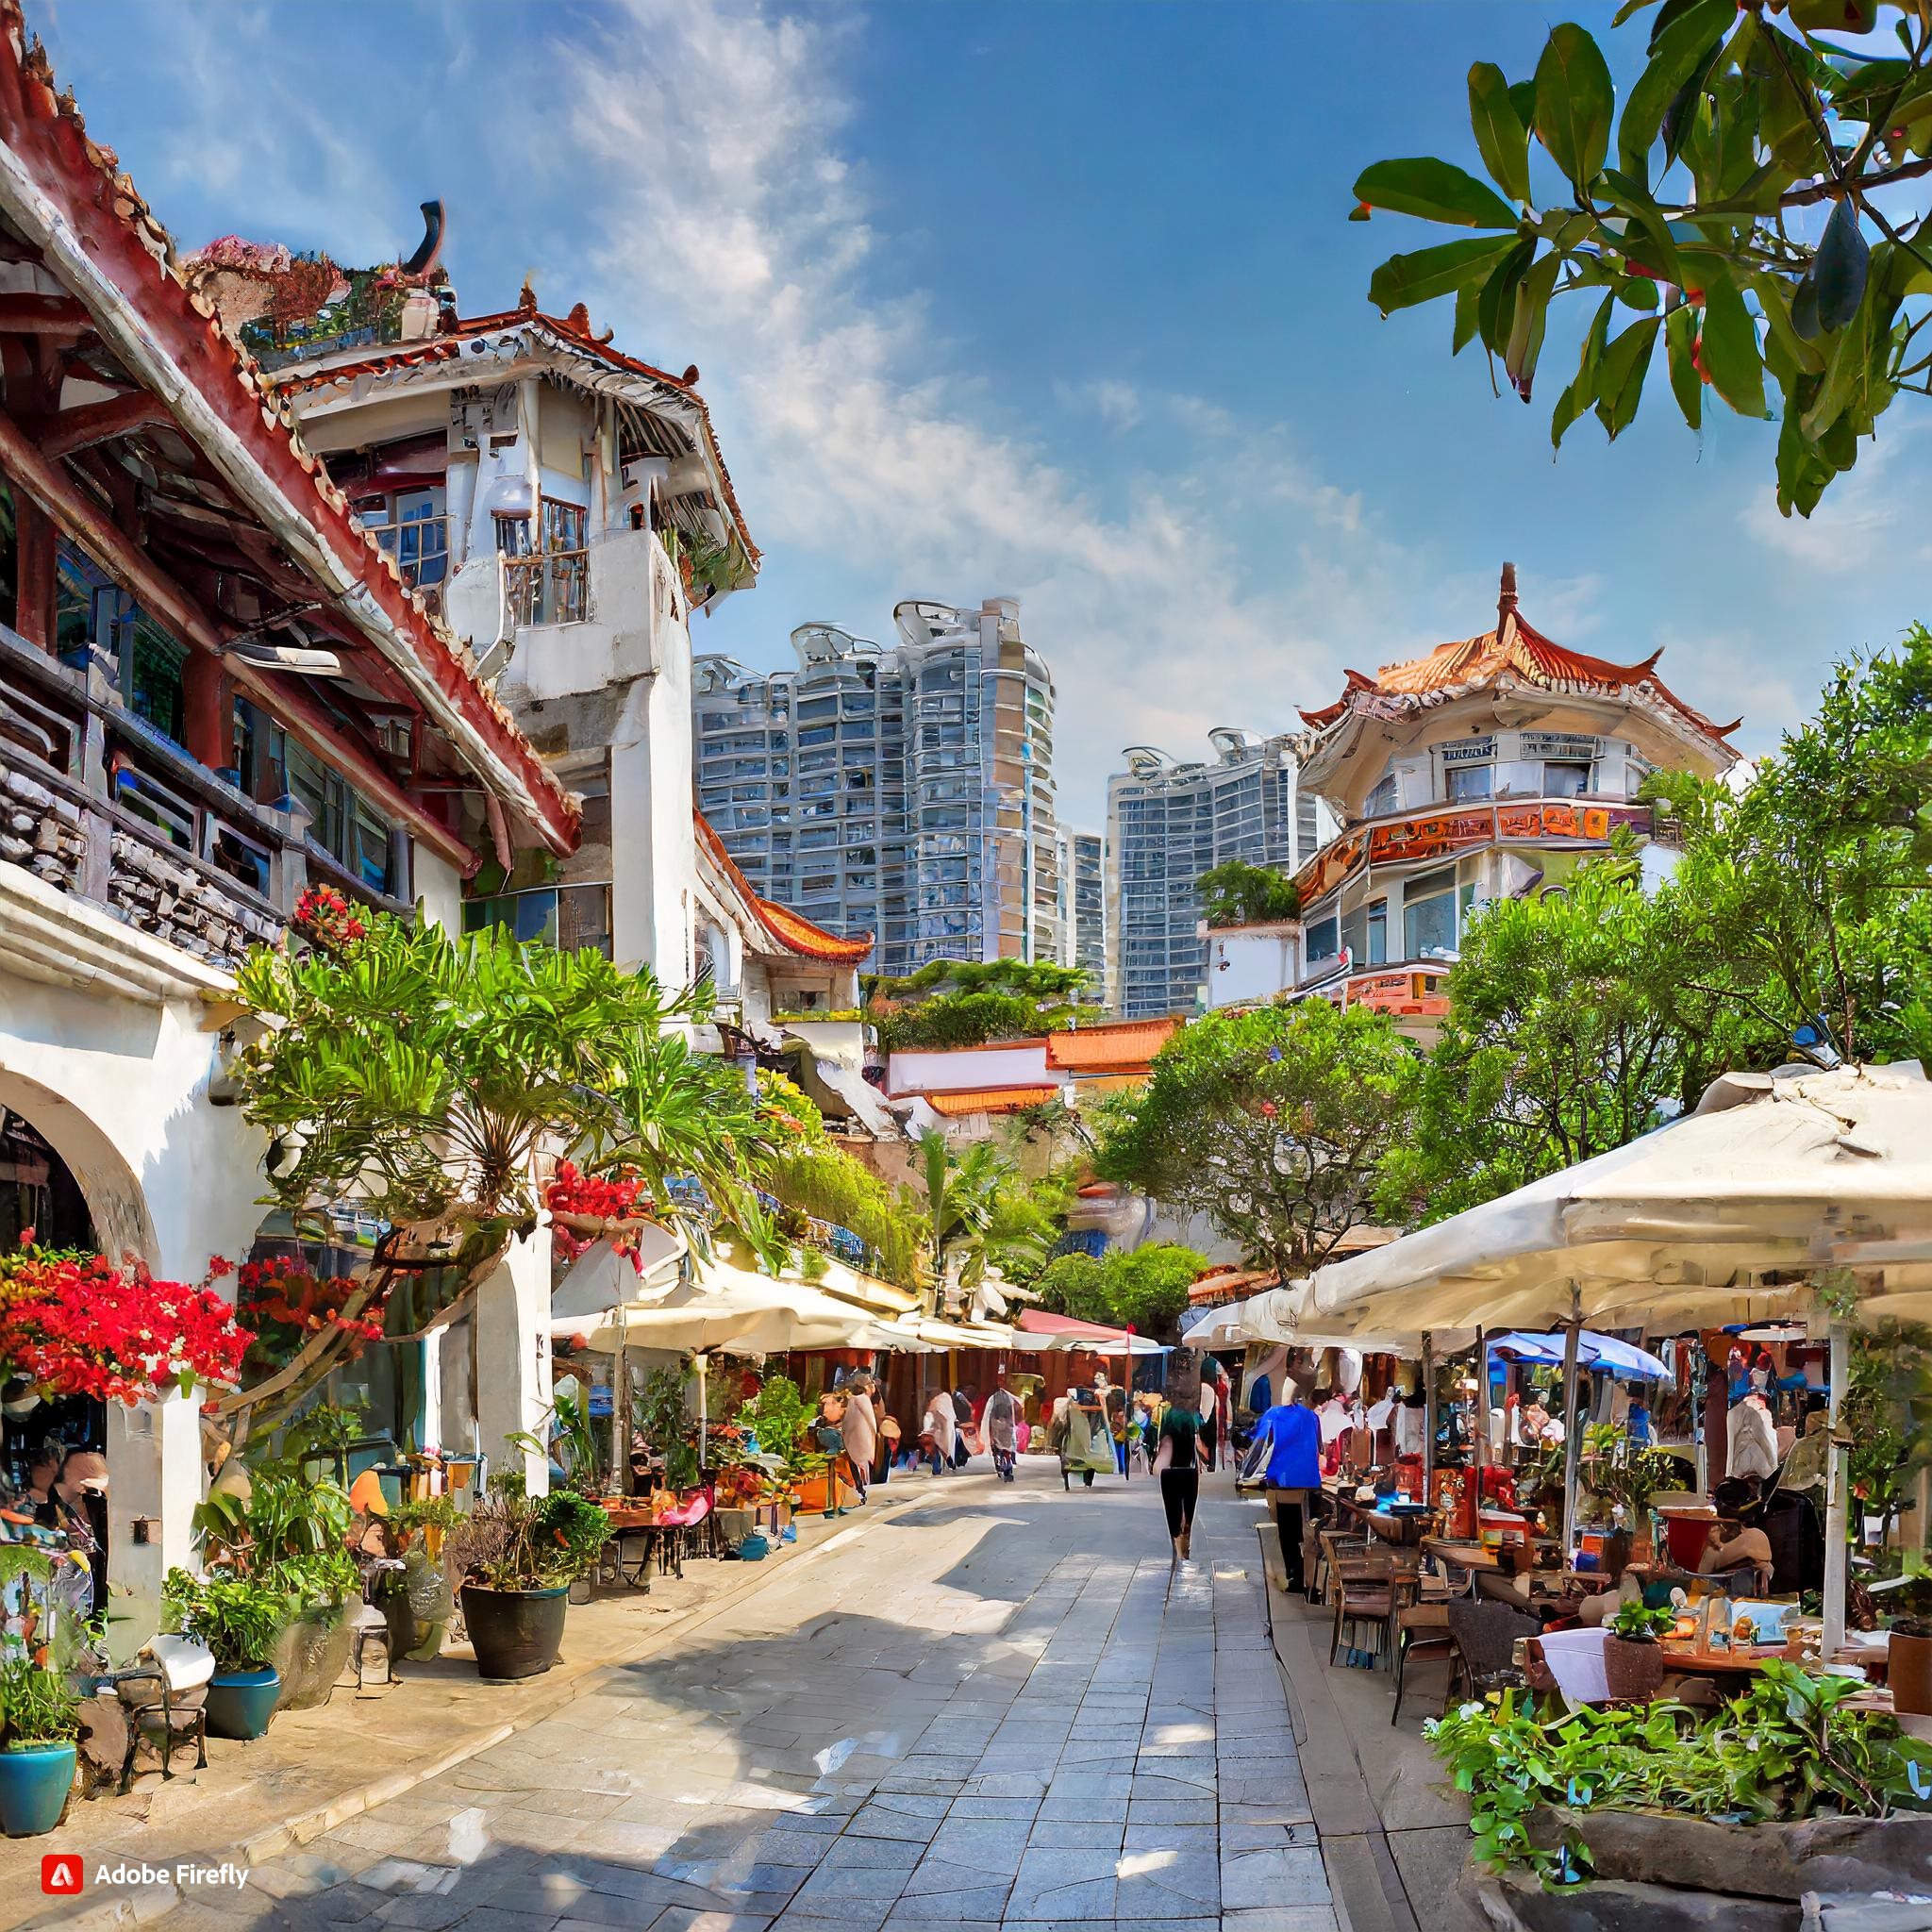 Firefly Zhongshan Road, Xiamen. There are many, many restaurants and gift shops surrounded by the ar.jpg